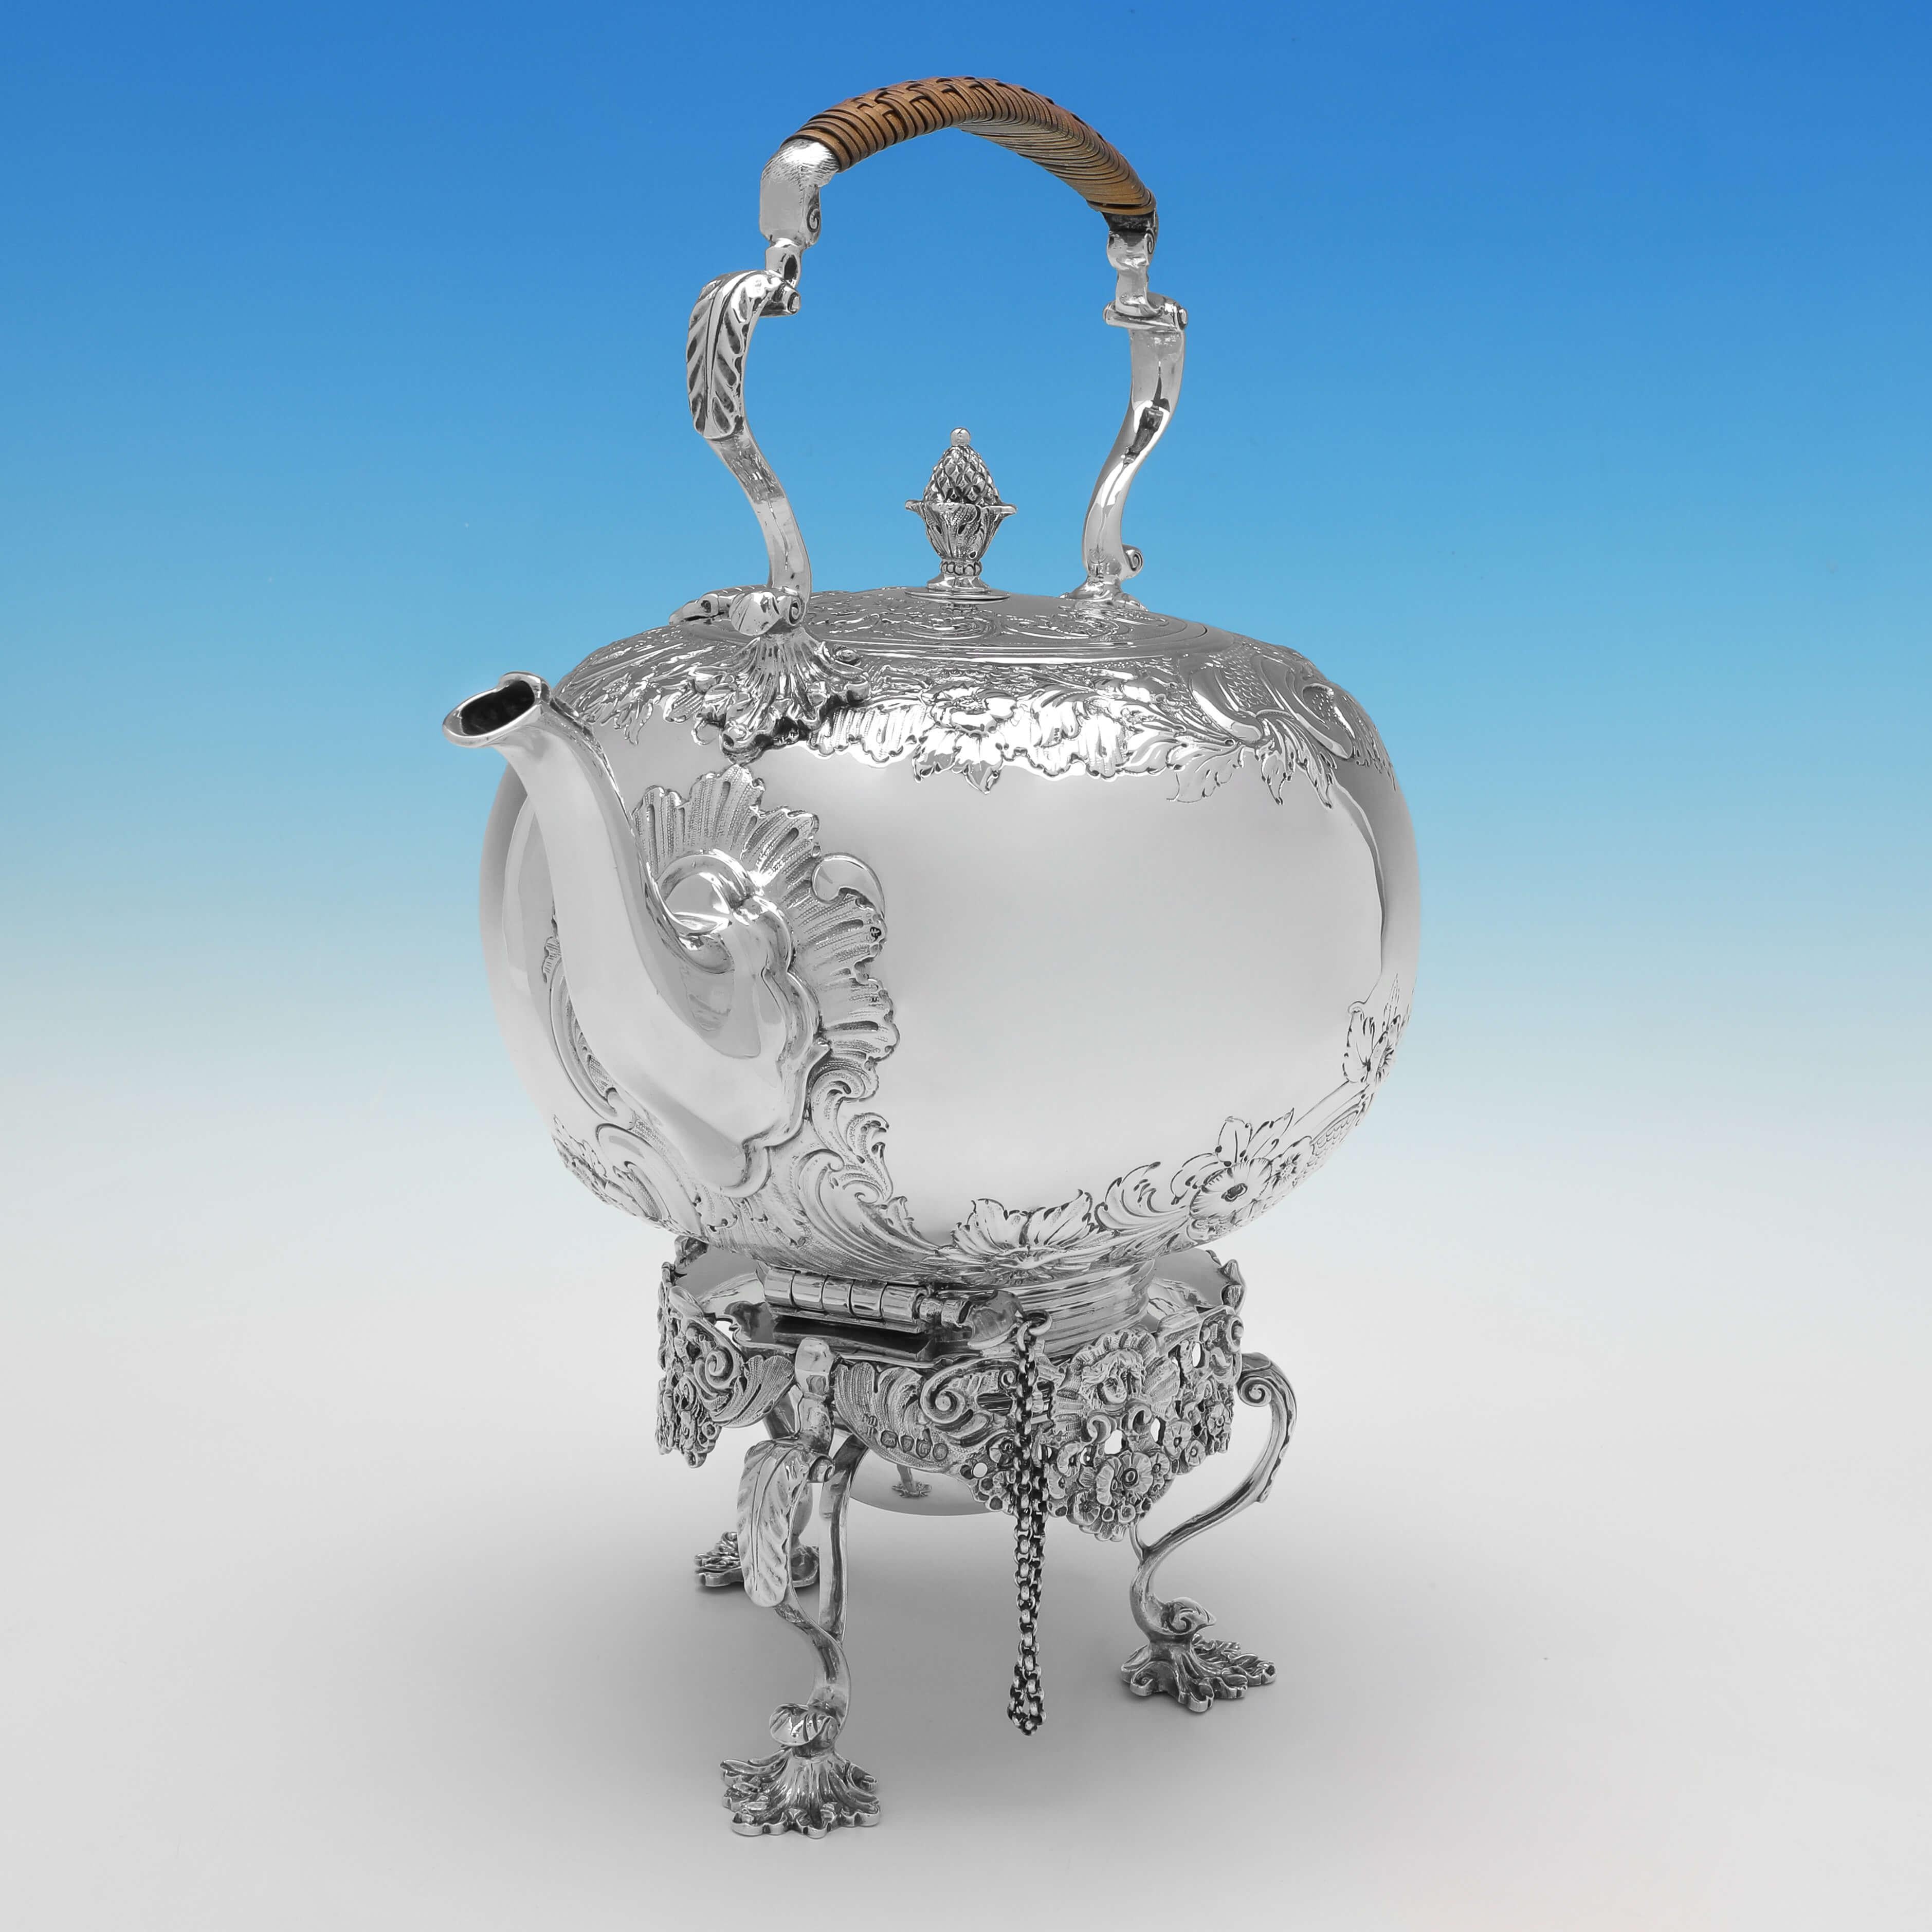 Hallmarked in London in 1882 by Daniel & Charles Houle, this attractive, Victorian, Antique Sterling Silver Kettle, features a cast stand which holds a spirit burner, flat chased decoration to the body and lid, and a wicker handle. 

The kettle